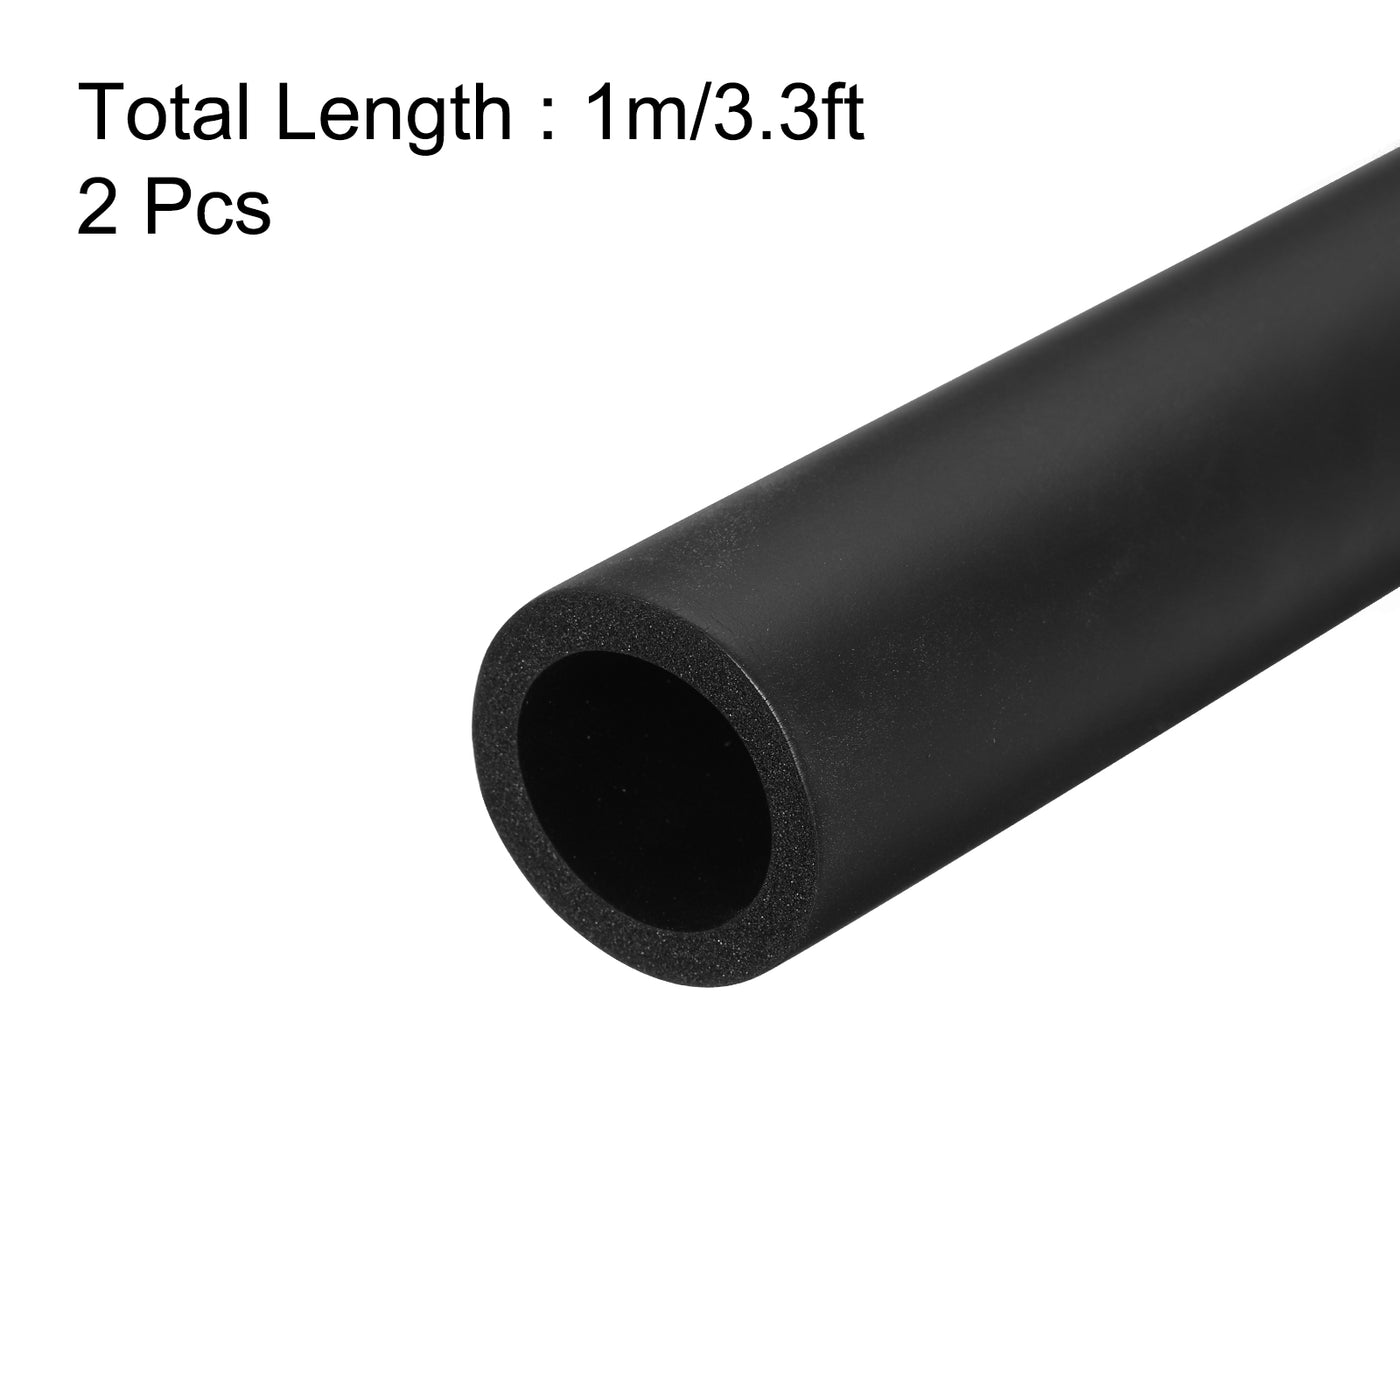 uxcell Uxcell 2pcs 3.3ft Pipe Insulation Tube 26mm ID 36mm OD Foam Tubing for Handle Grip Support, Black